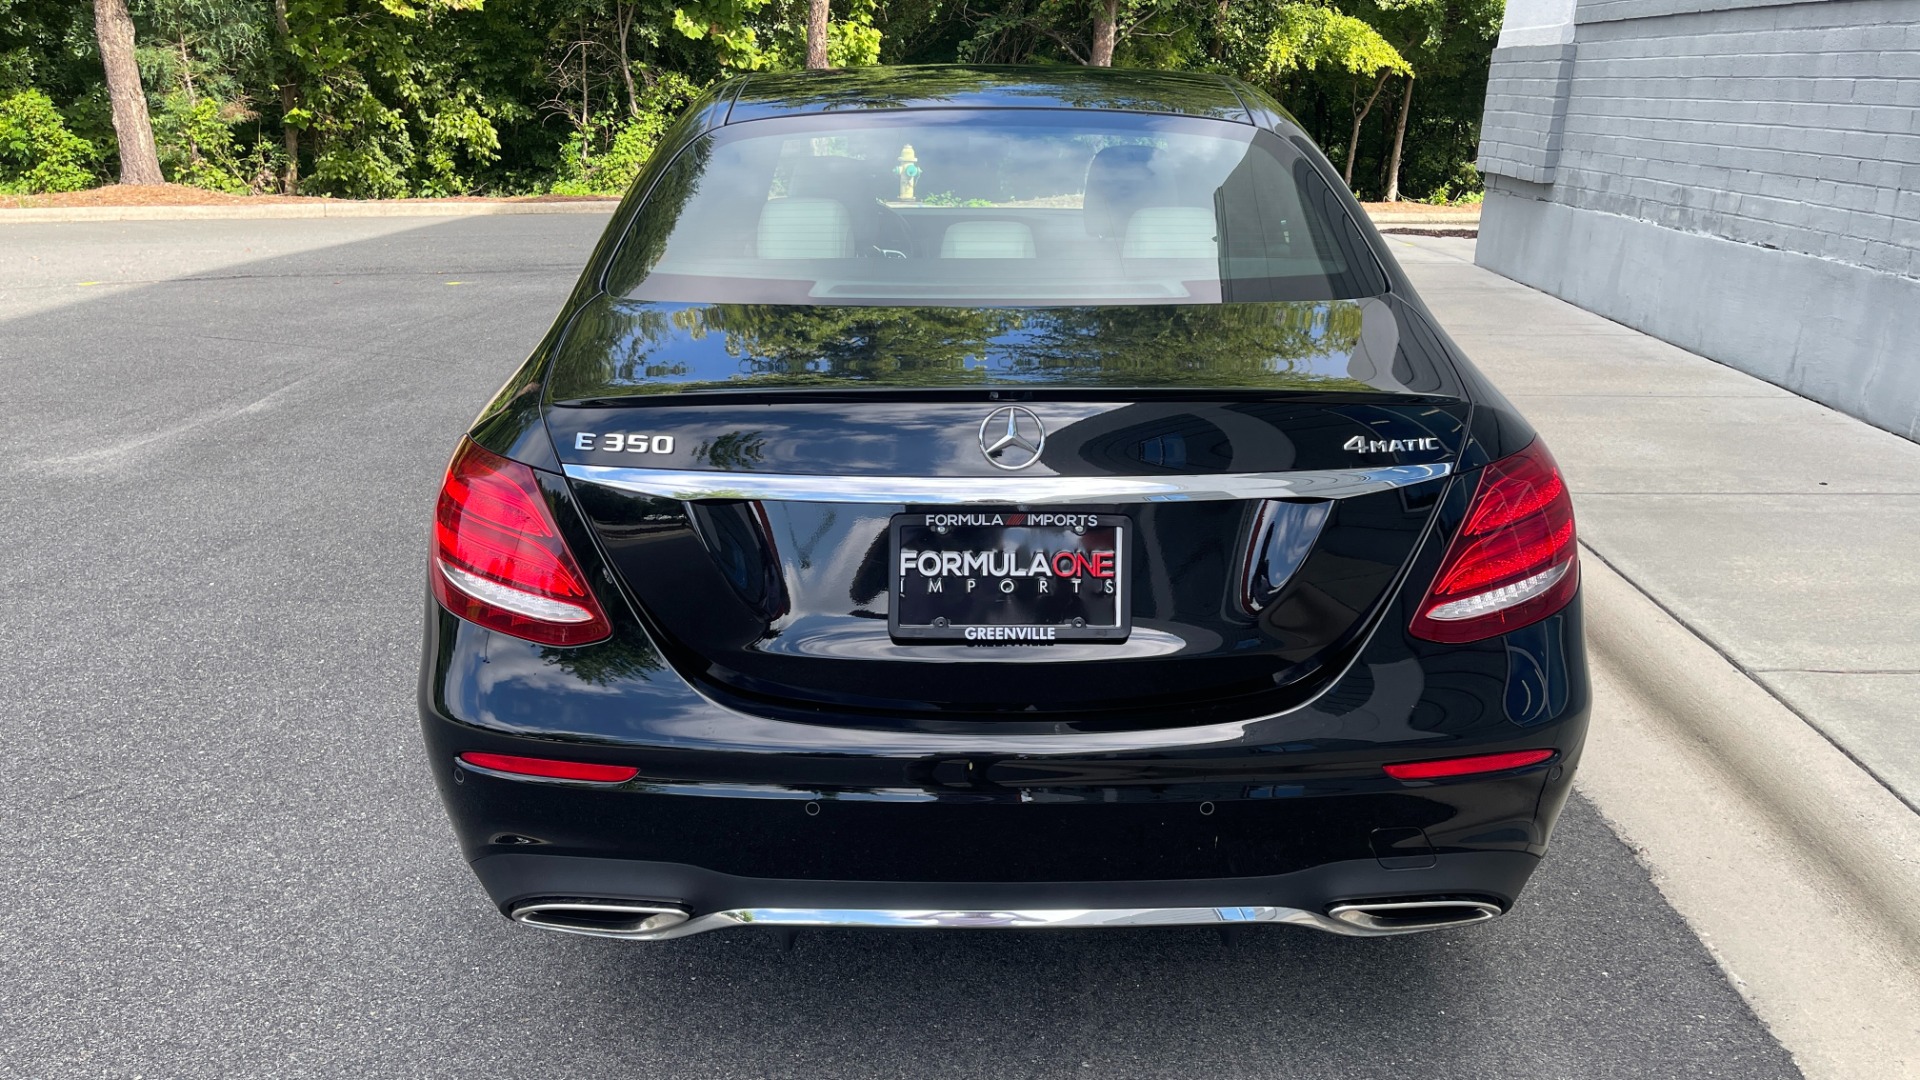 Used 2020 Mercedes-Benz E-Class E 350 / 4MATIC / AMG LINE / BURMESTER SOUND / PANORAMIC ROOF for sale $52,999 at Formula Imports in Charlotte NC 28227 5